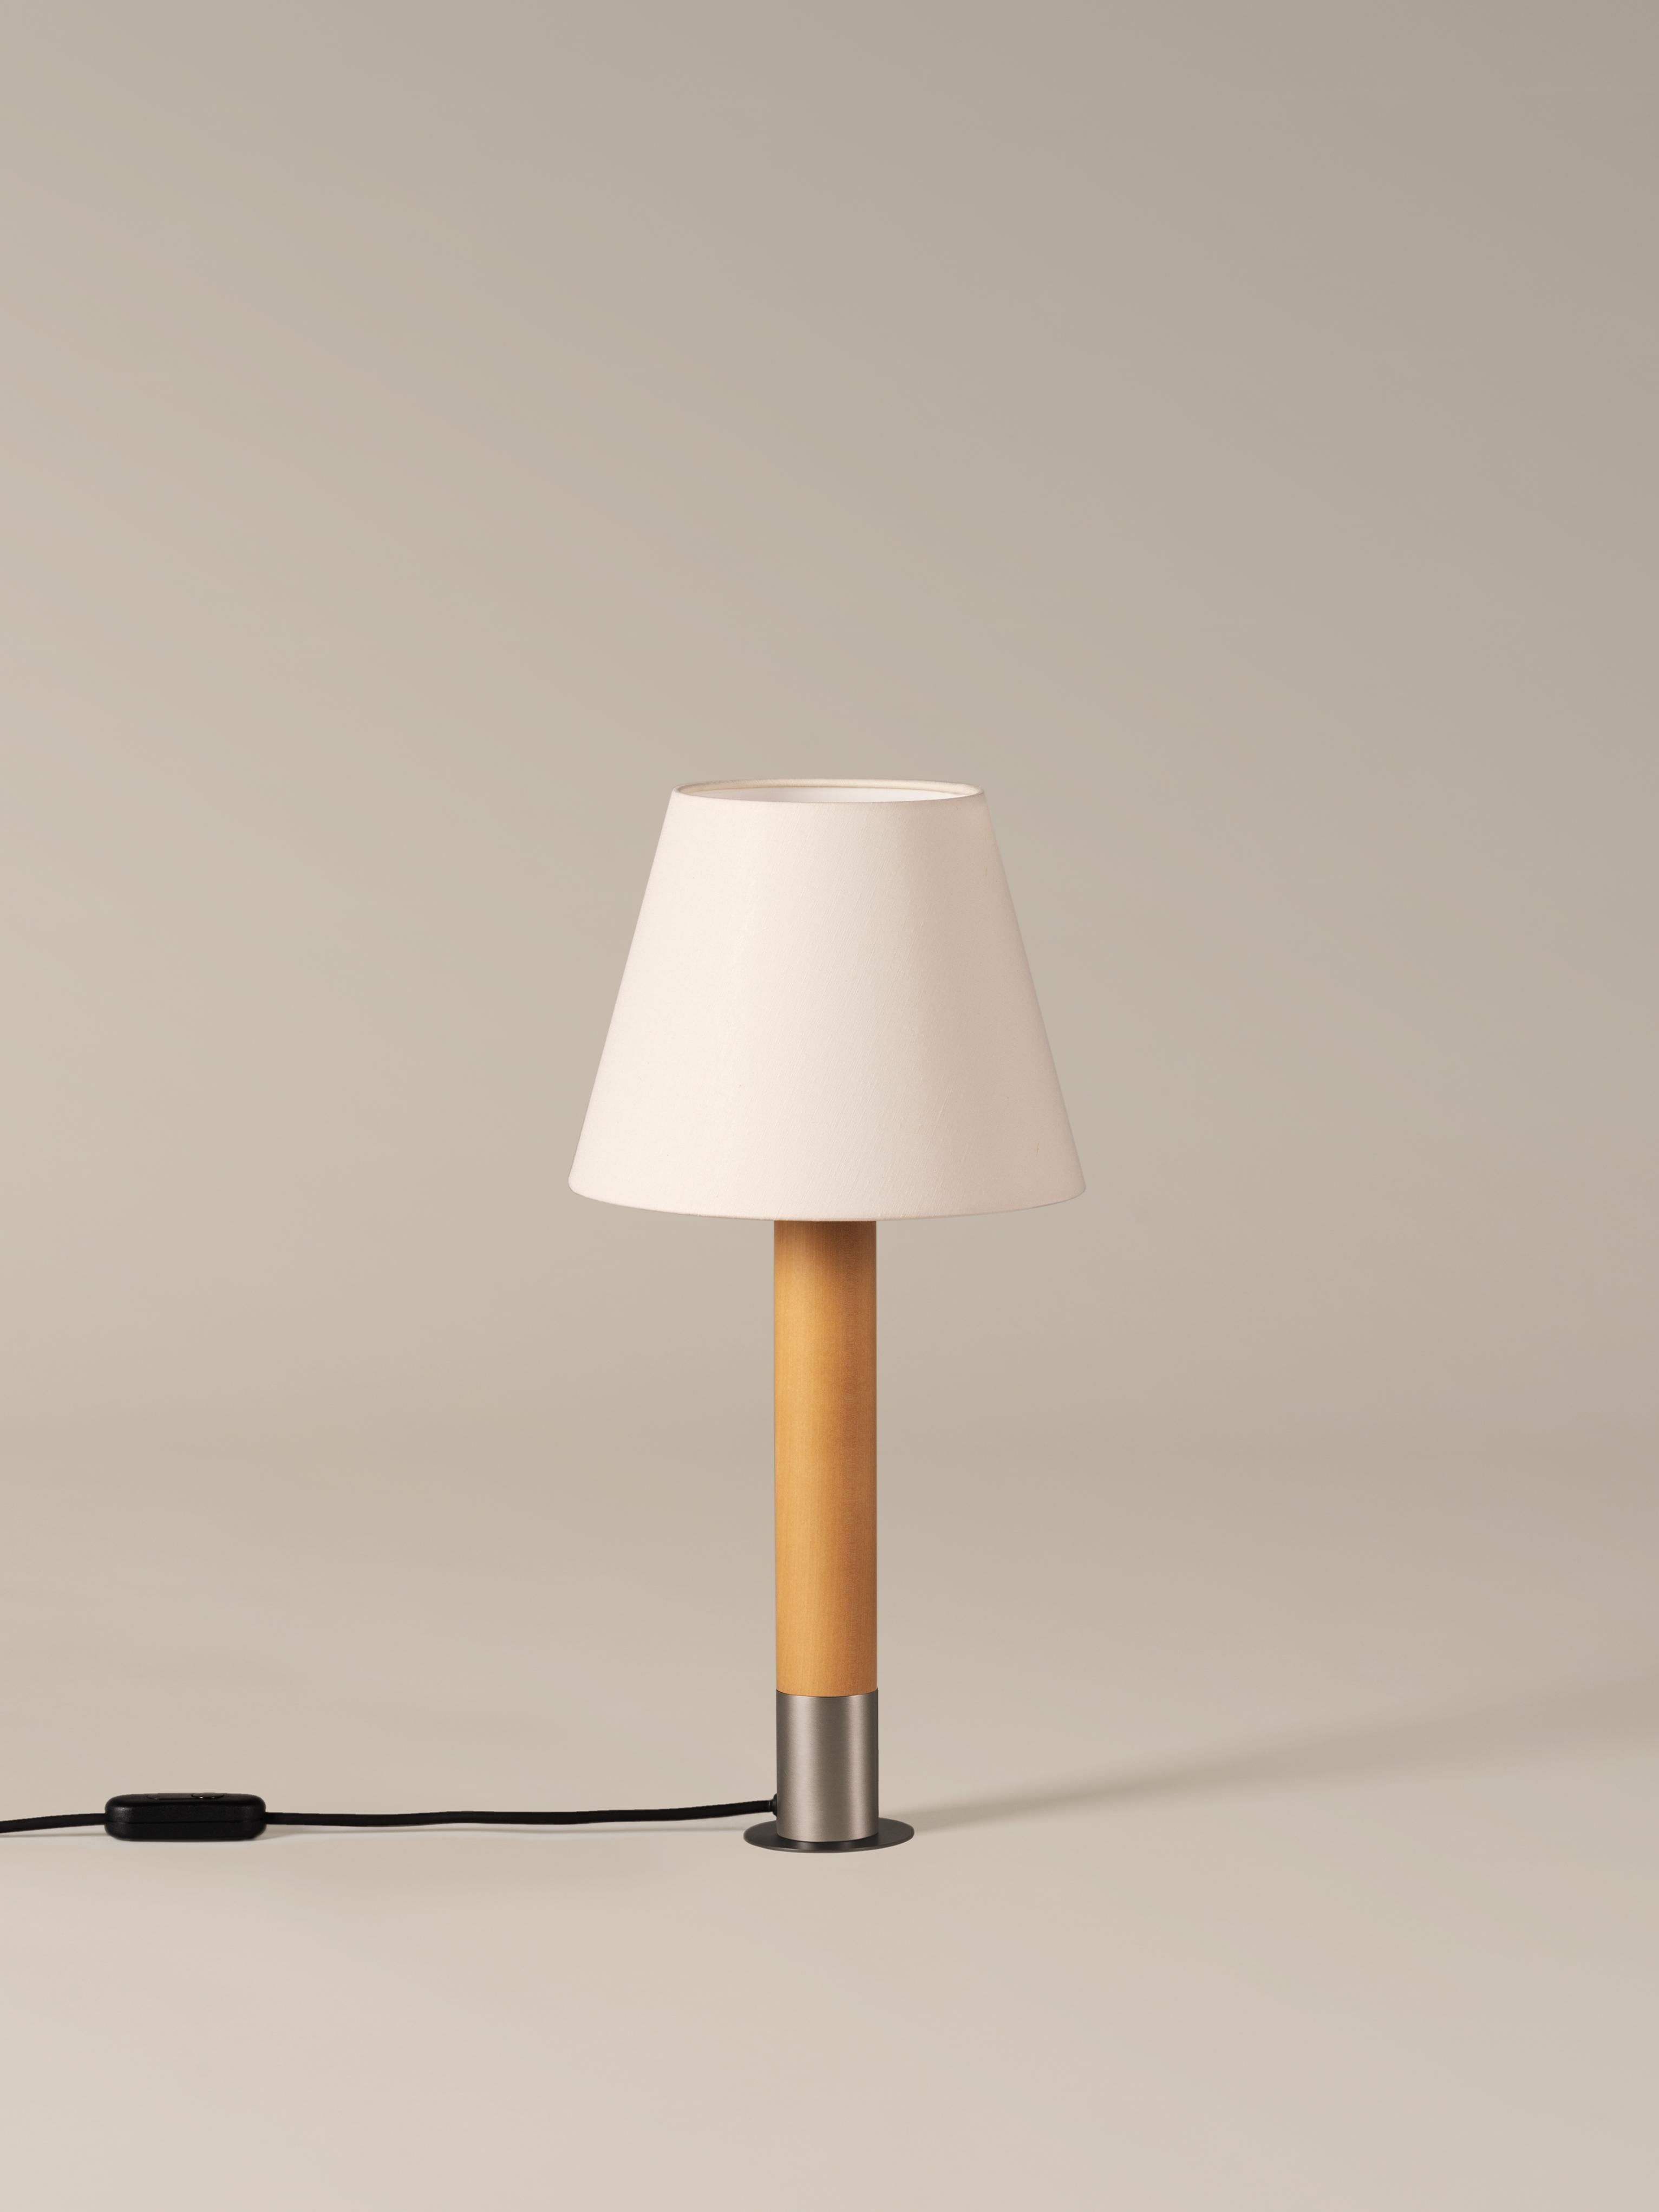 Modern Nickel and White Básica M1 Table Lamp by Santiago Roqueta, Santa & Cole For Sale